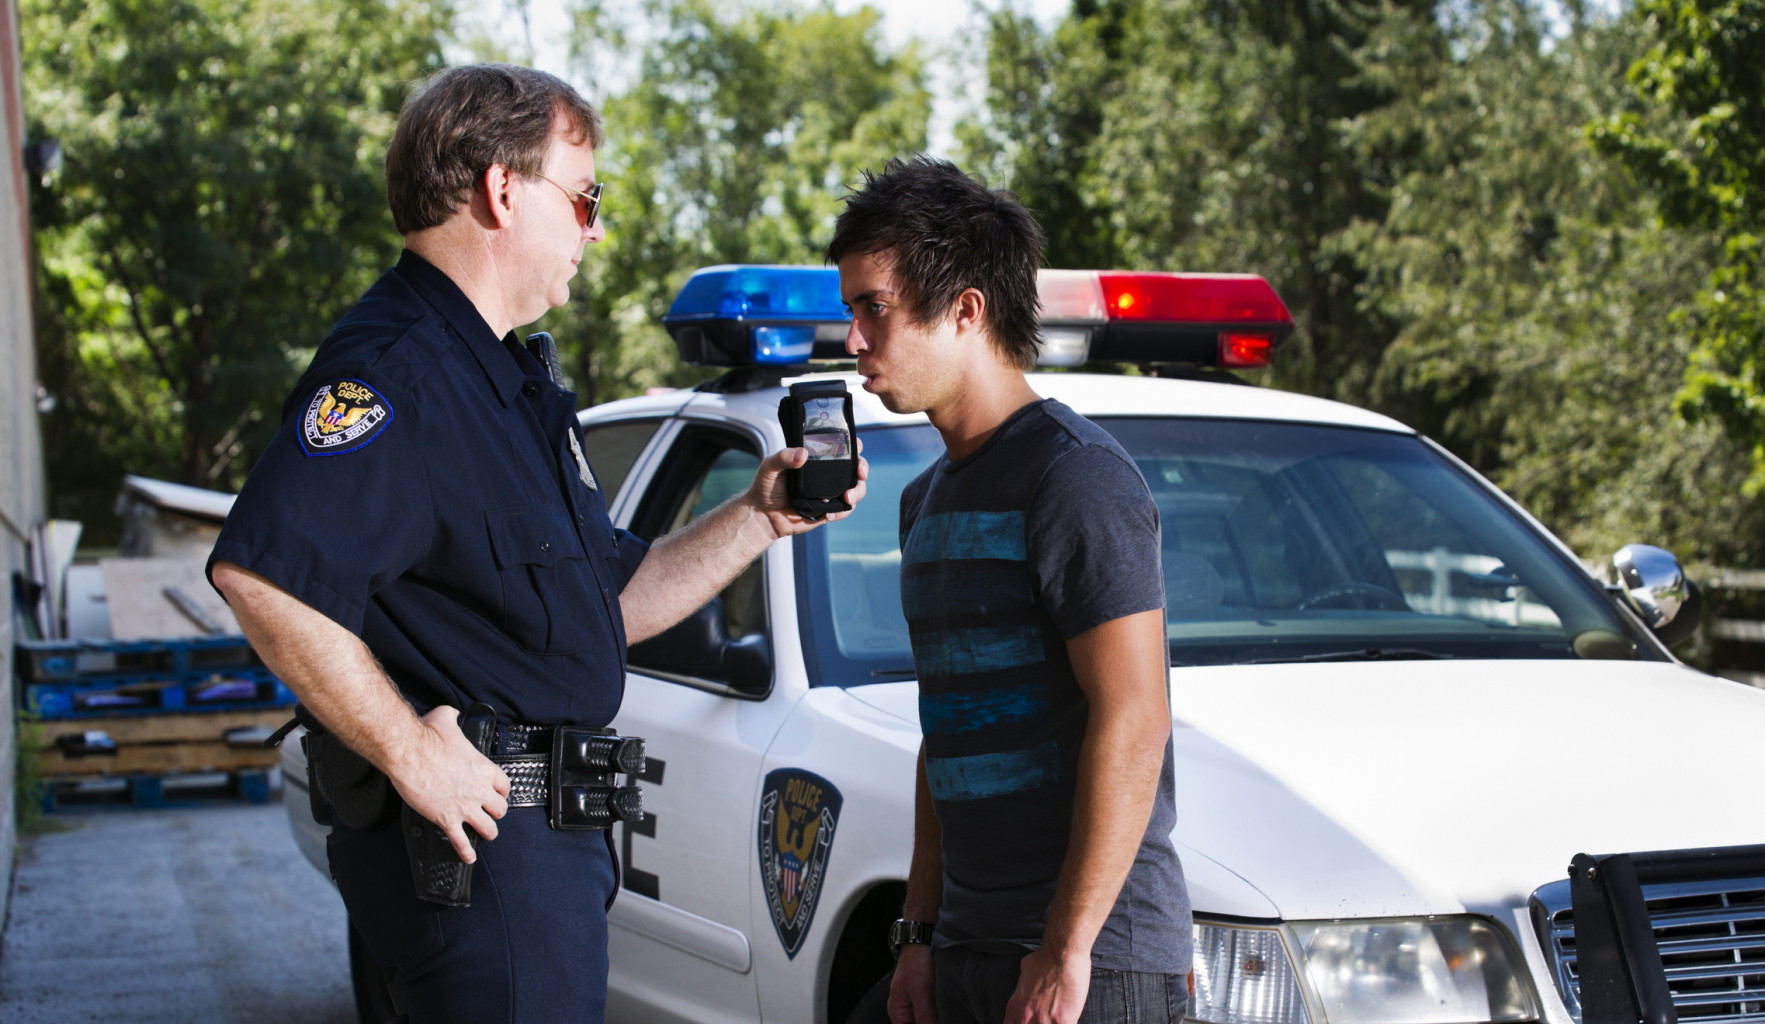 Can You Get a DUI on Private Property?